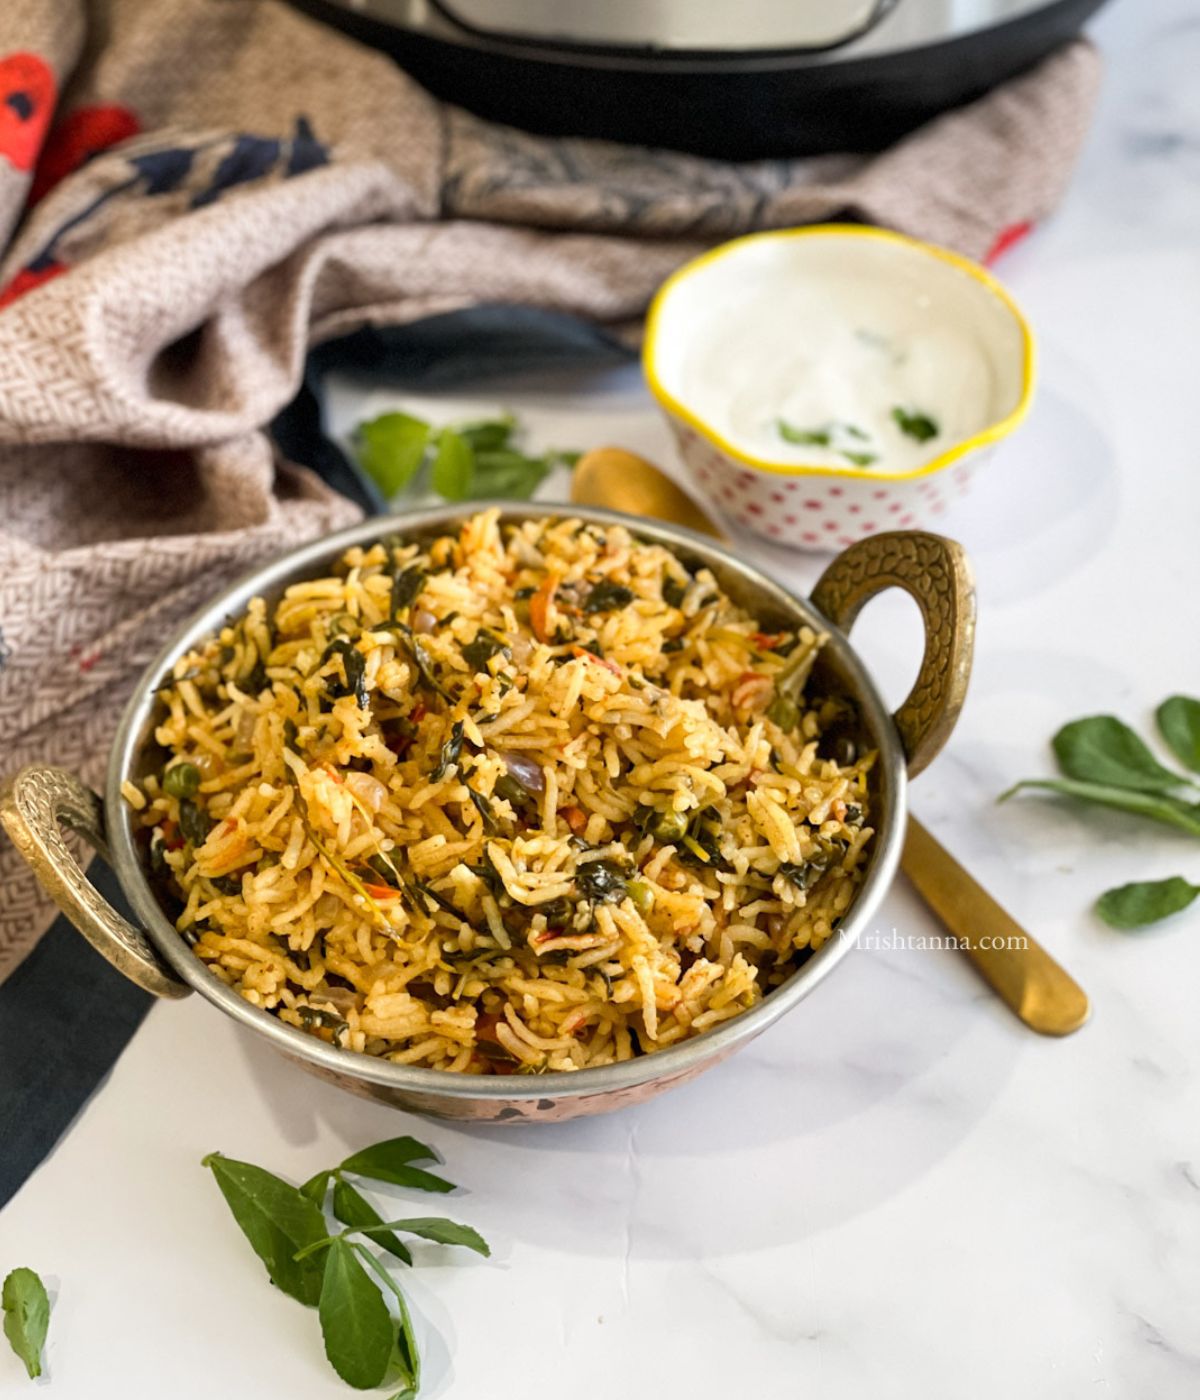 A bowl of fenugreek leaves rice and raita is on the table along with a spoon.